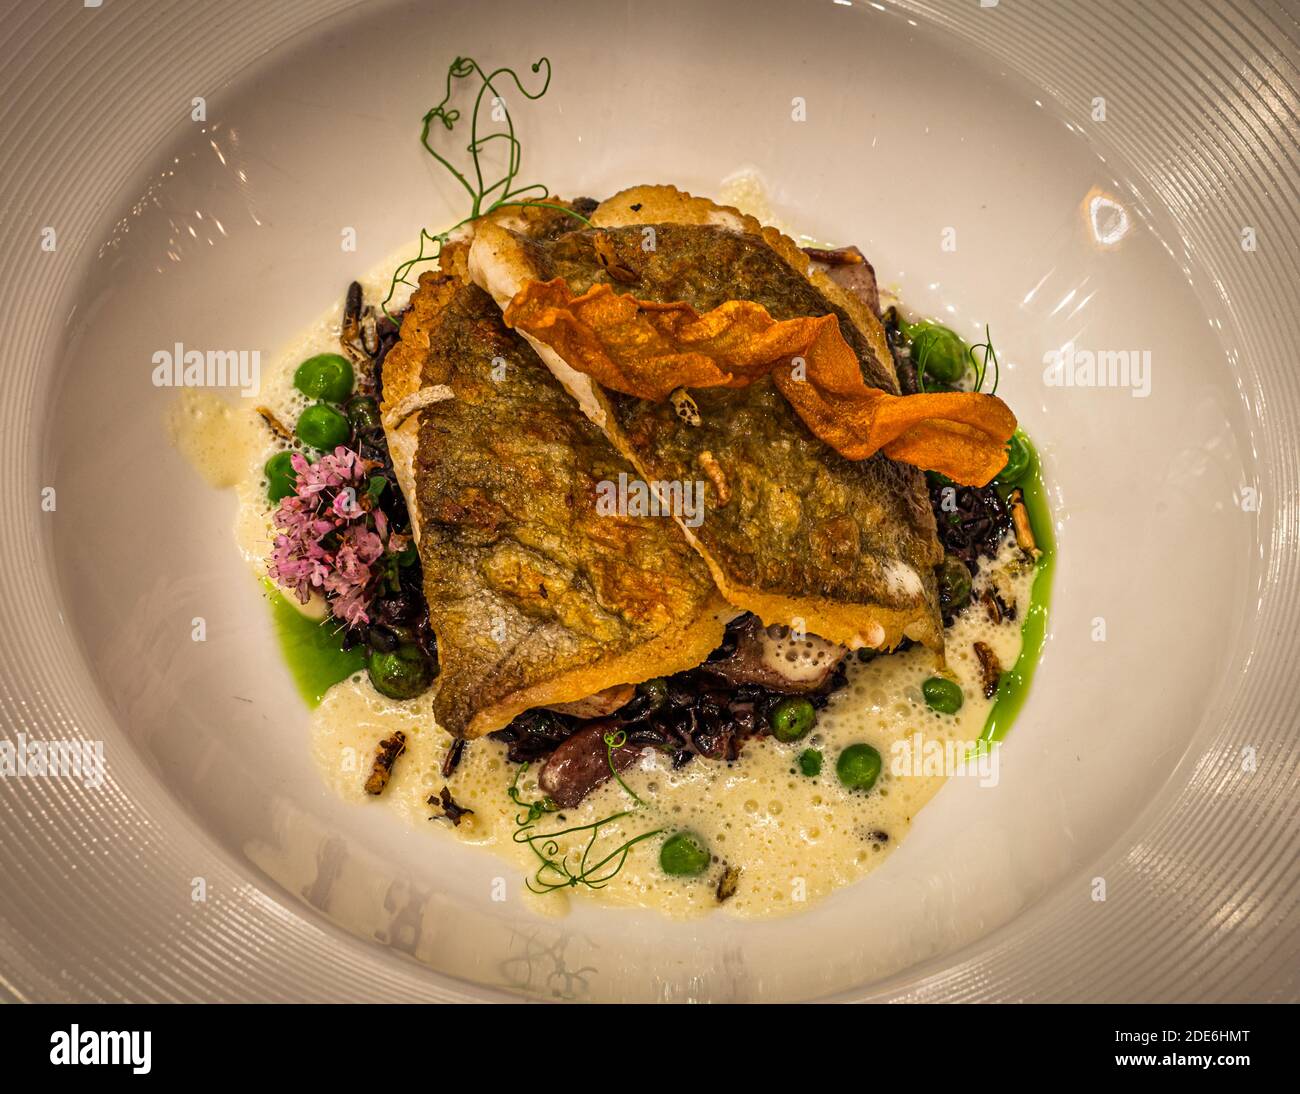 Extremely crispy St. Peter's fish, called John Dory in English, served with black rice risotto with artichoke bottoms, peas and white wine sauce. Restaurant Dish in The Dunloe Hotel near Killarney, Ireland Stock Photo